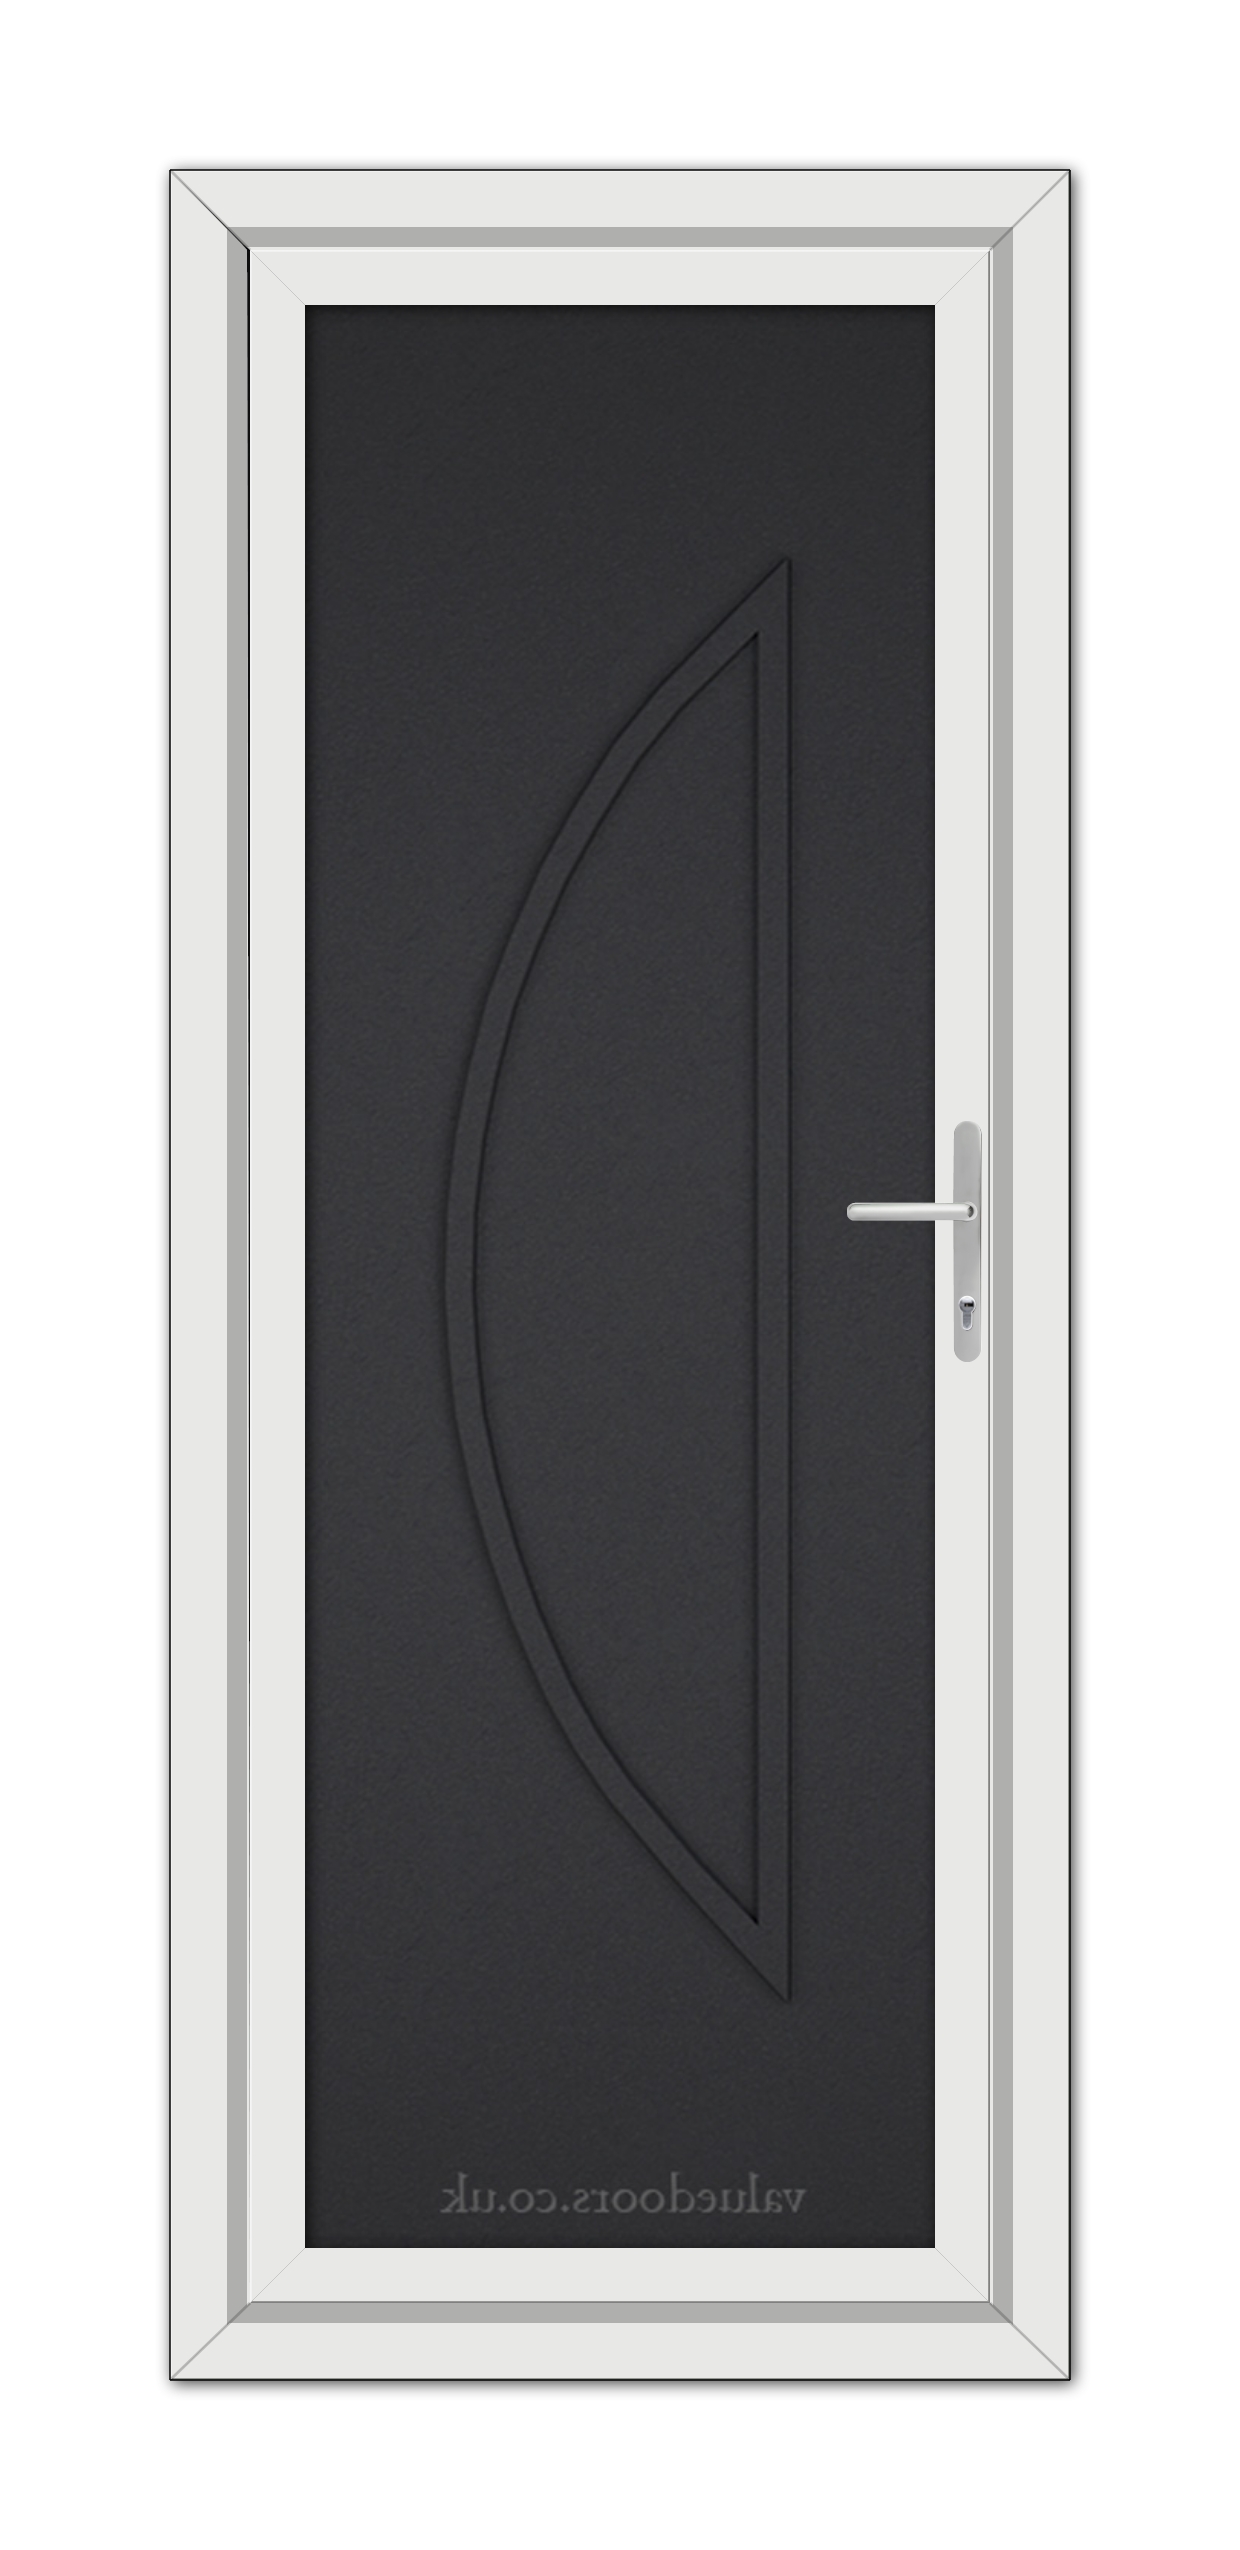 A Black Brown Modern 5051 Solid uPVC Door with a curved relief design, framed in white and equipped with a silver handle, viewed from the front.